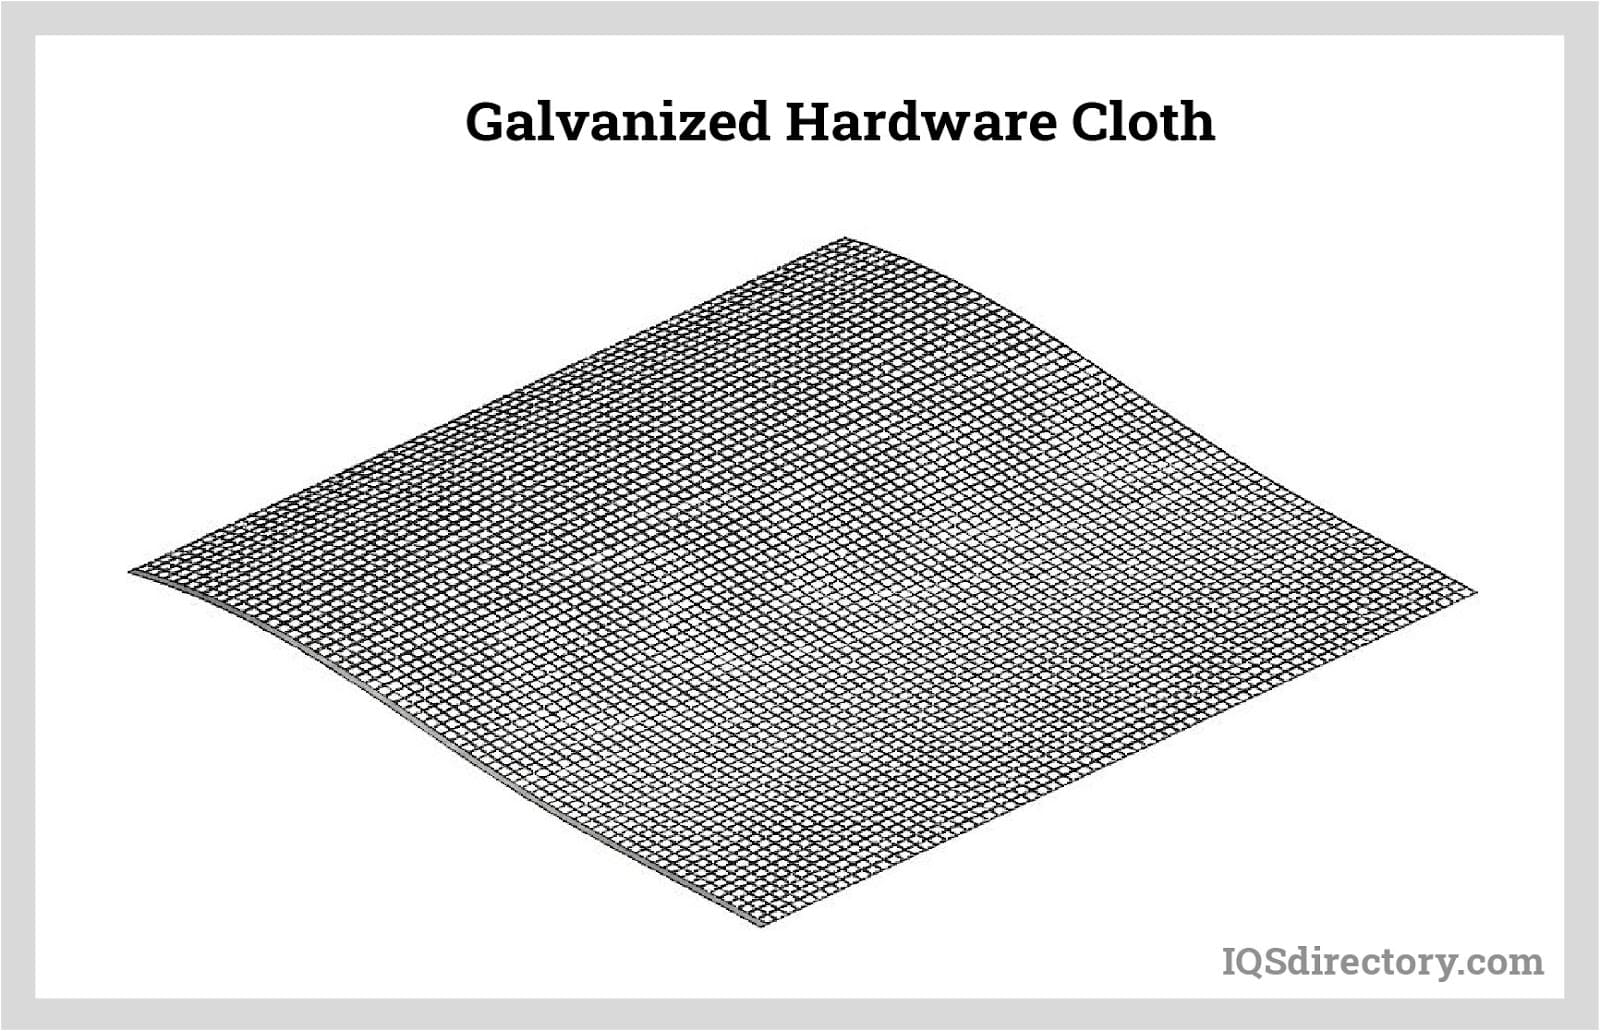 Hardware Cloth: What Is It? How Is It Made? Types, Uses